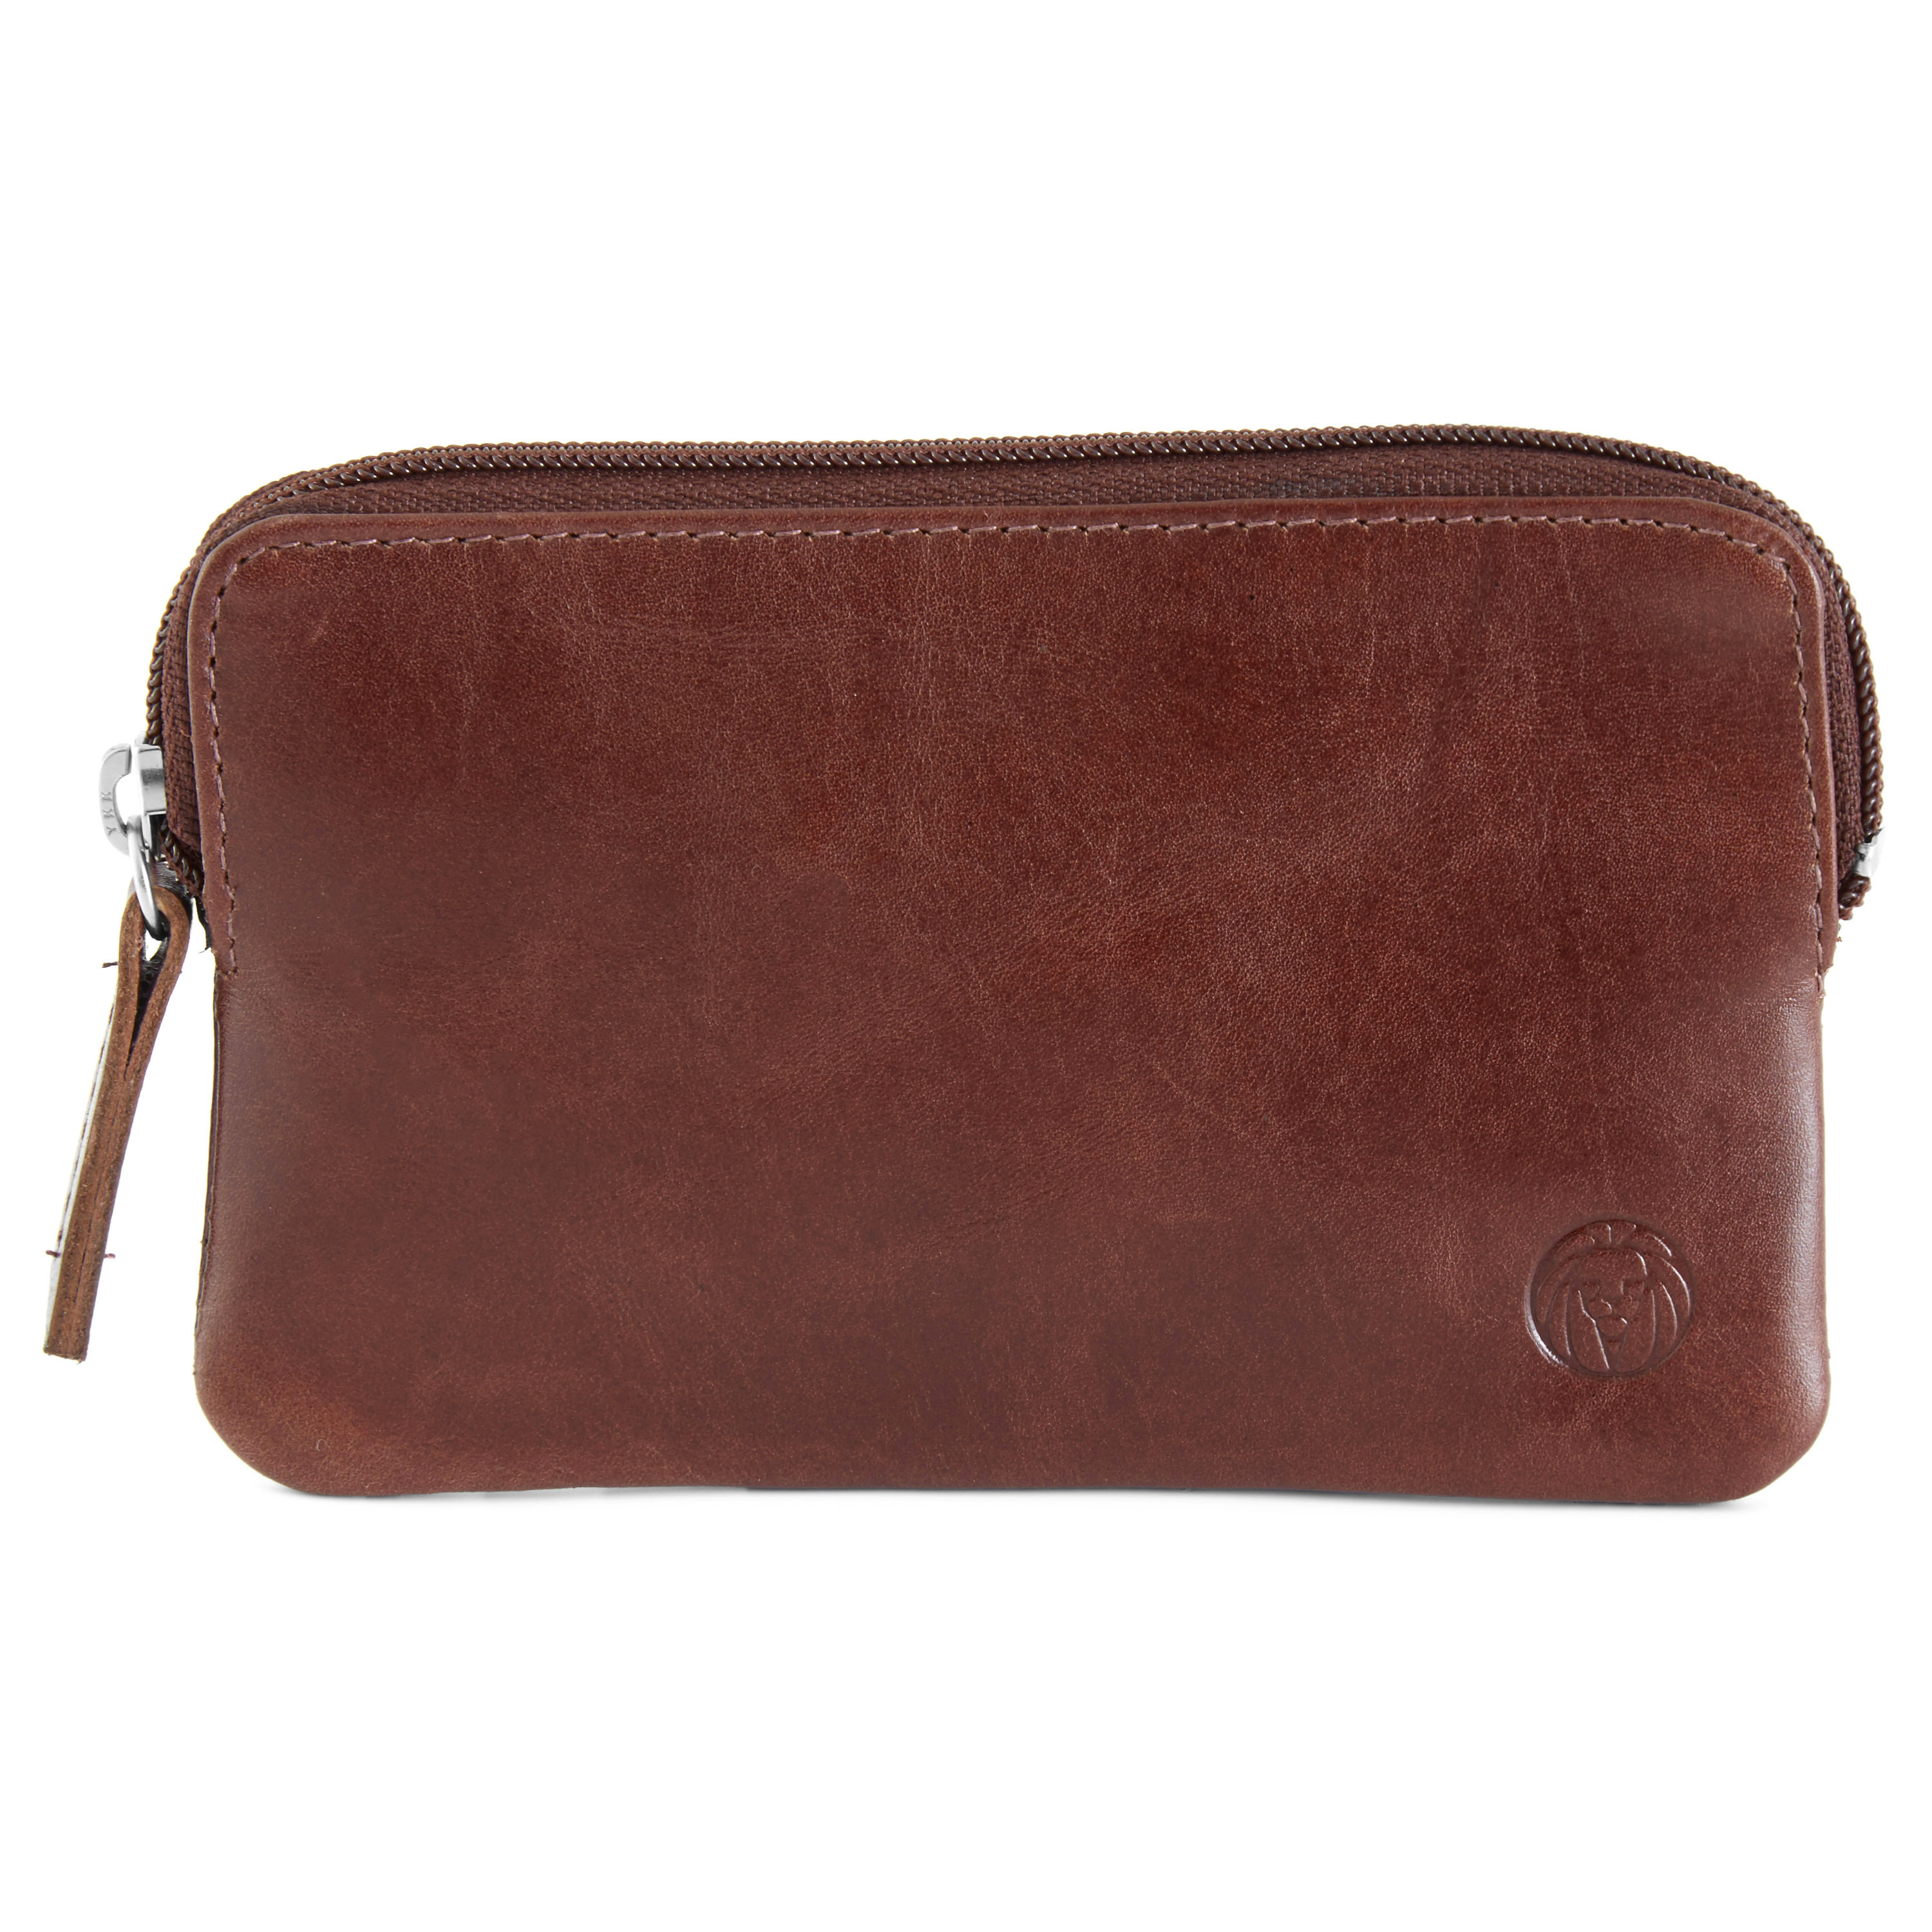 Brown Zipped Jasper Leather Wallet | In stock! | Lucleon